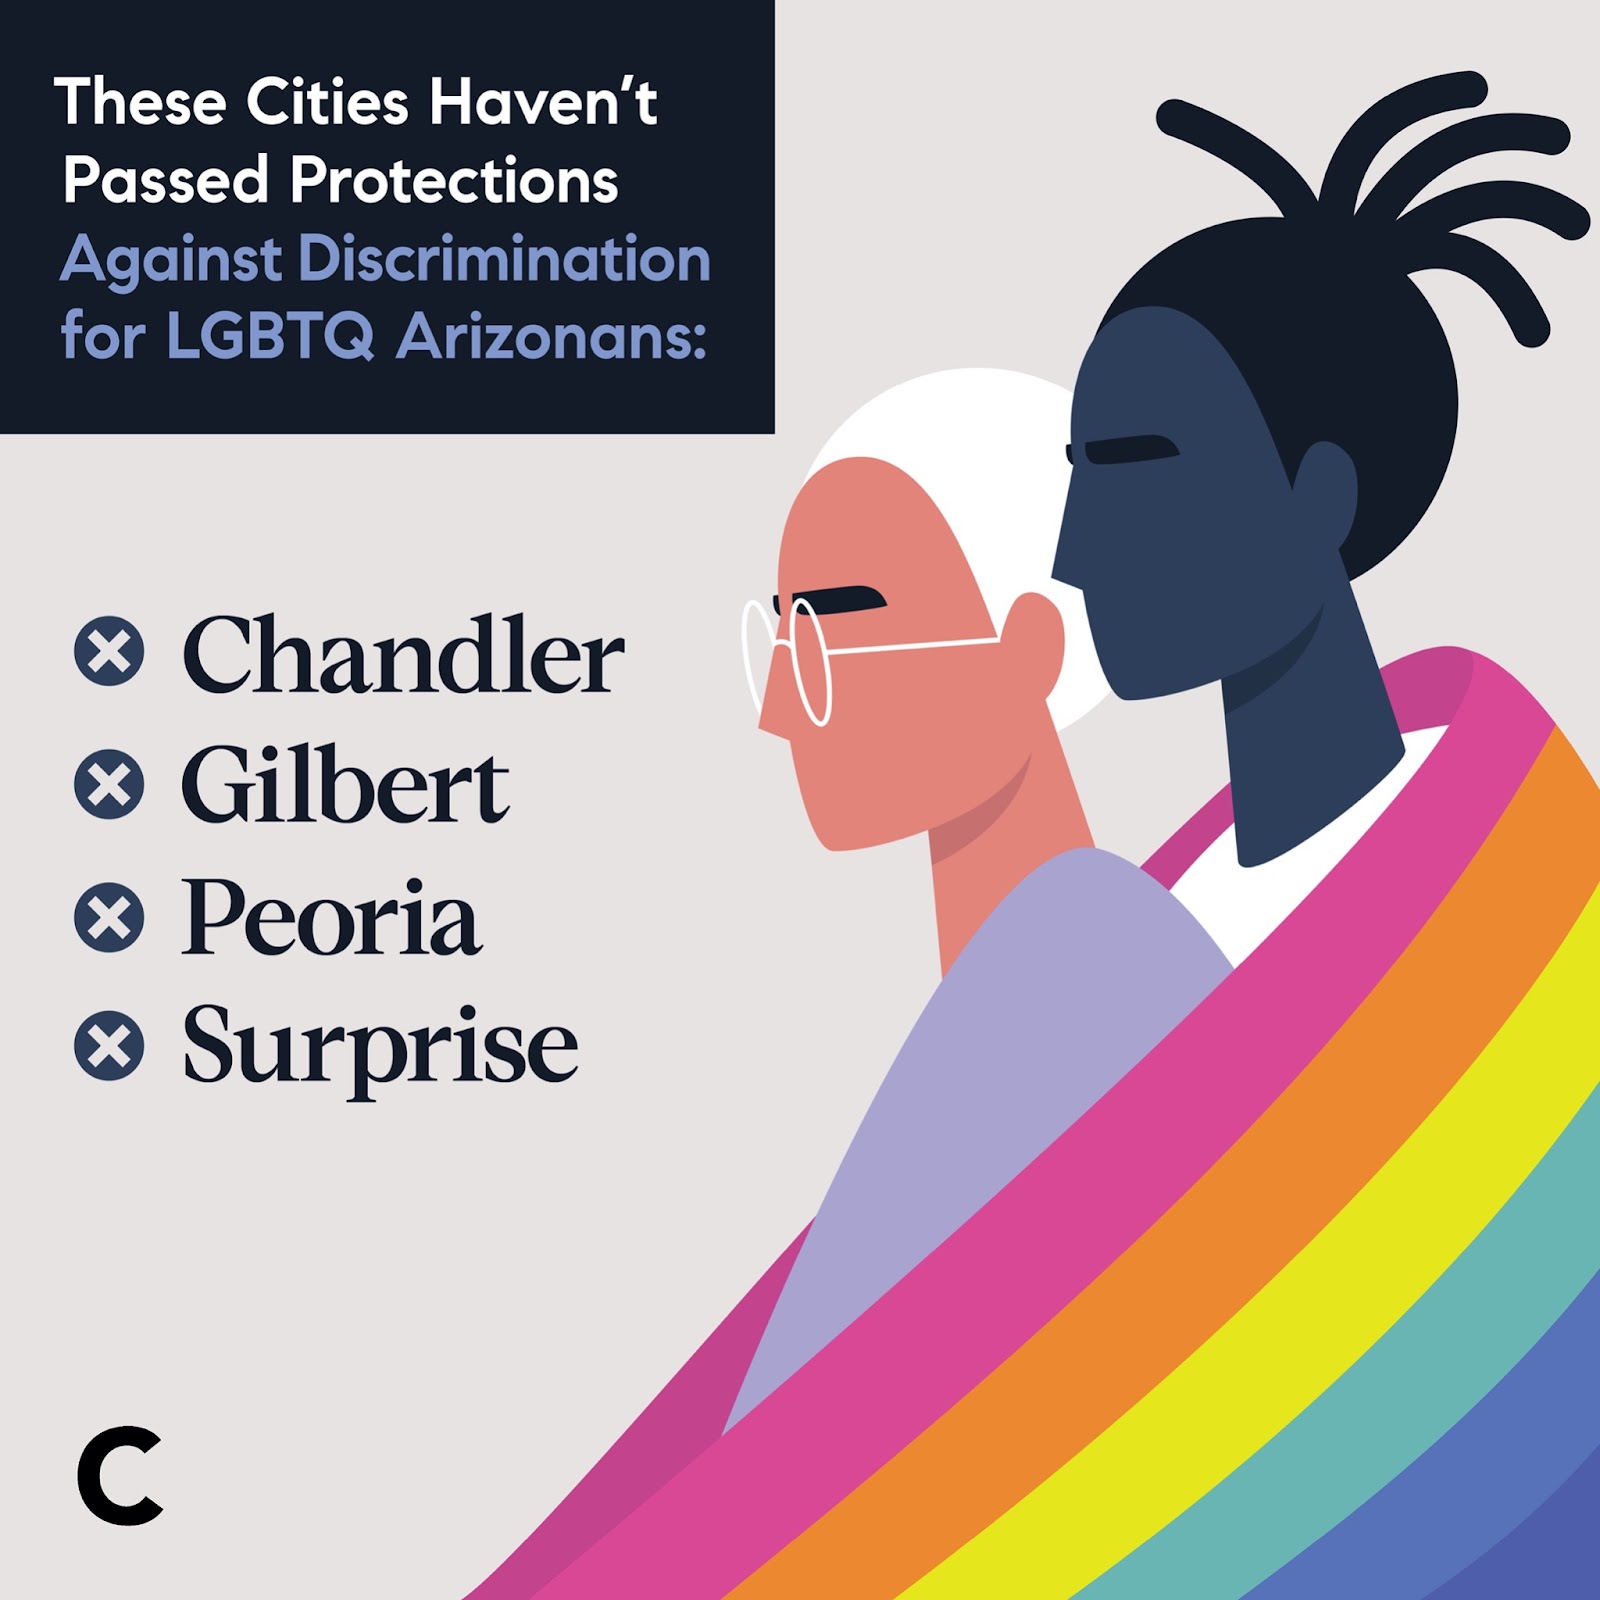 Activists Have Worked to Strengthen LGBTQ Protections for Years. What’s Making Arizona Cities Finally Listen?